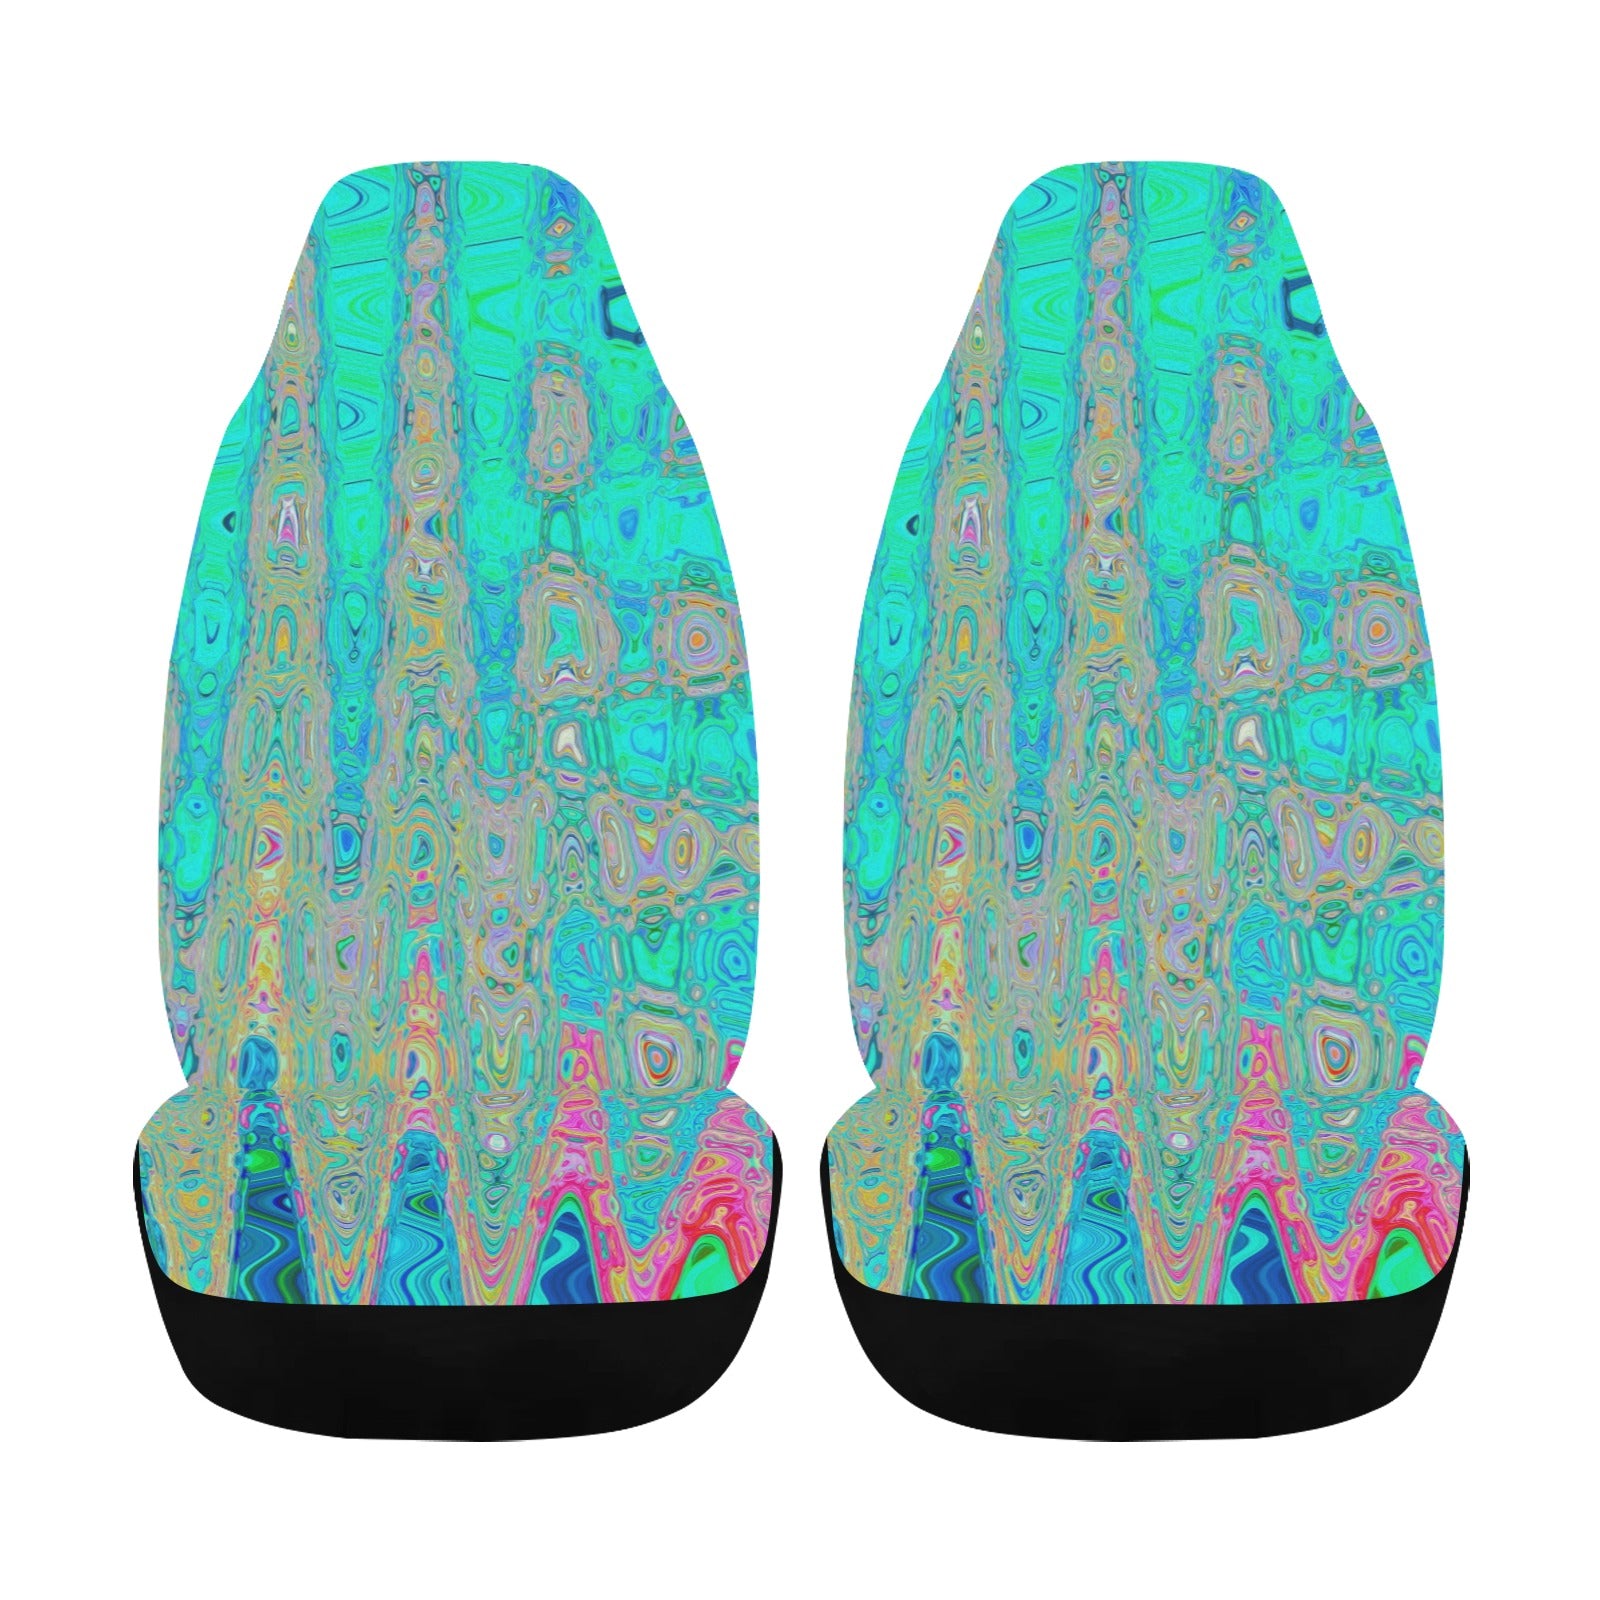 Car Seat Covers | Groovy Abstract Retro Rainbow Atomic Waves